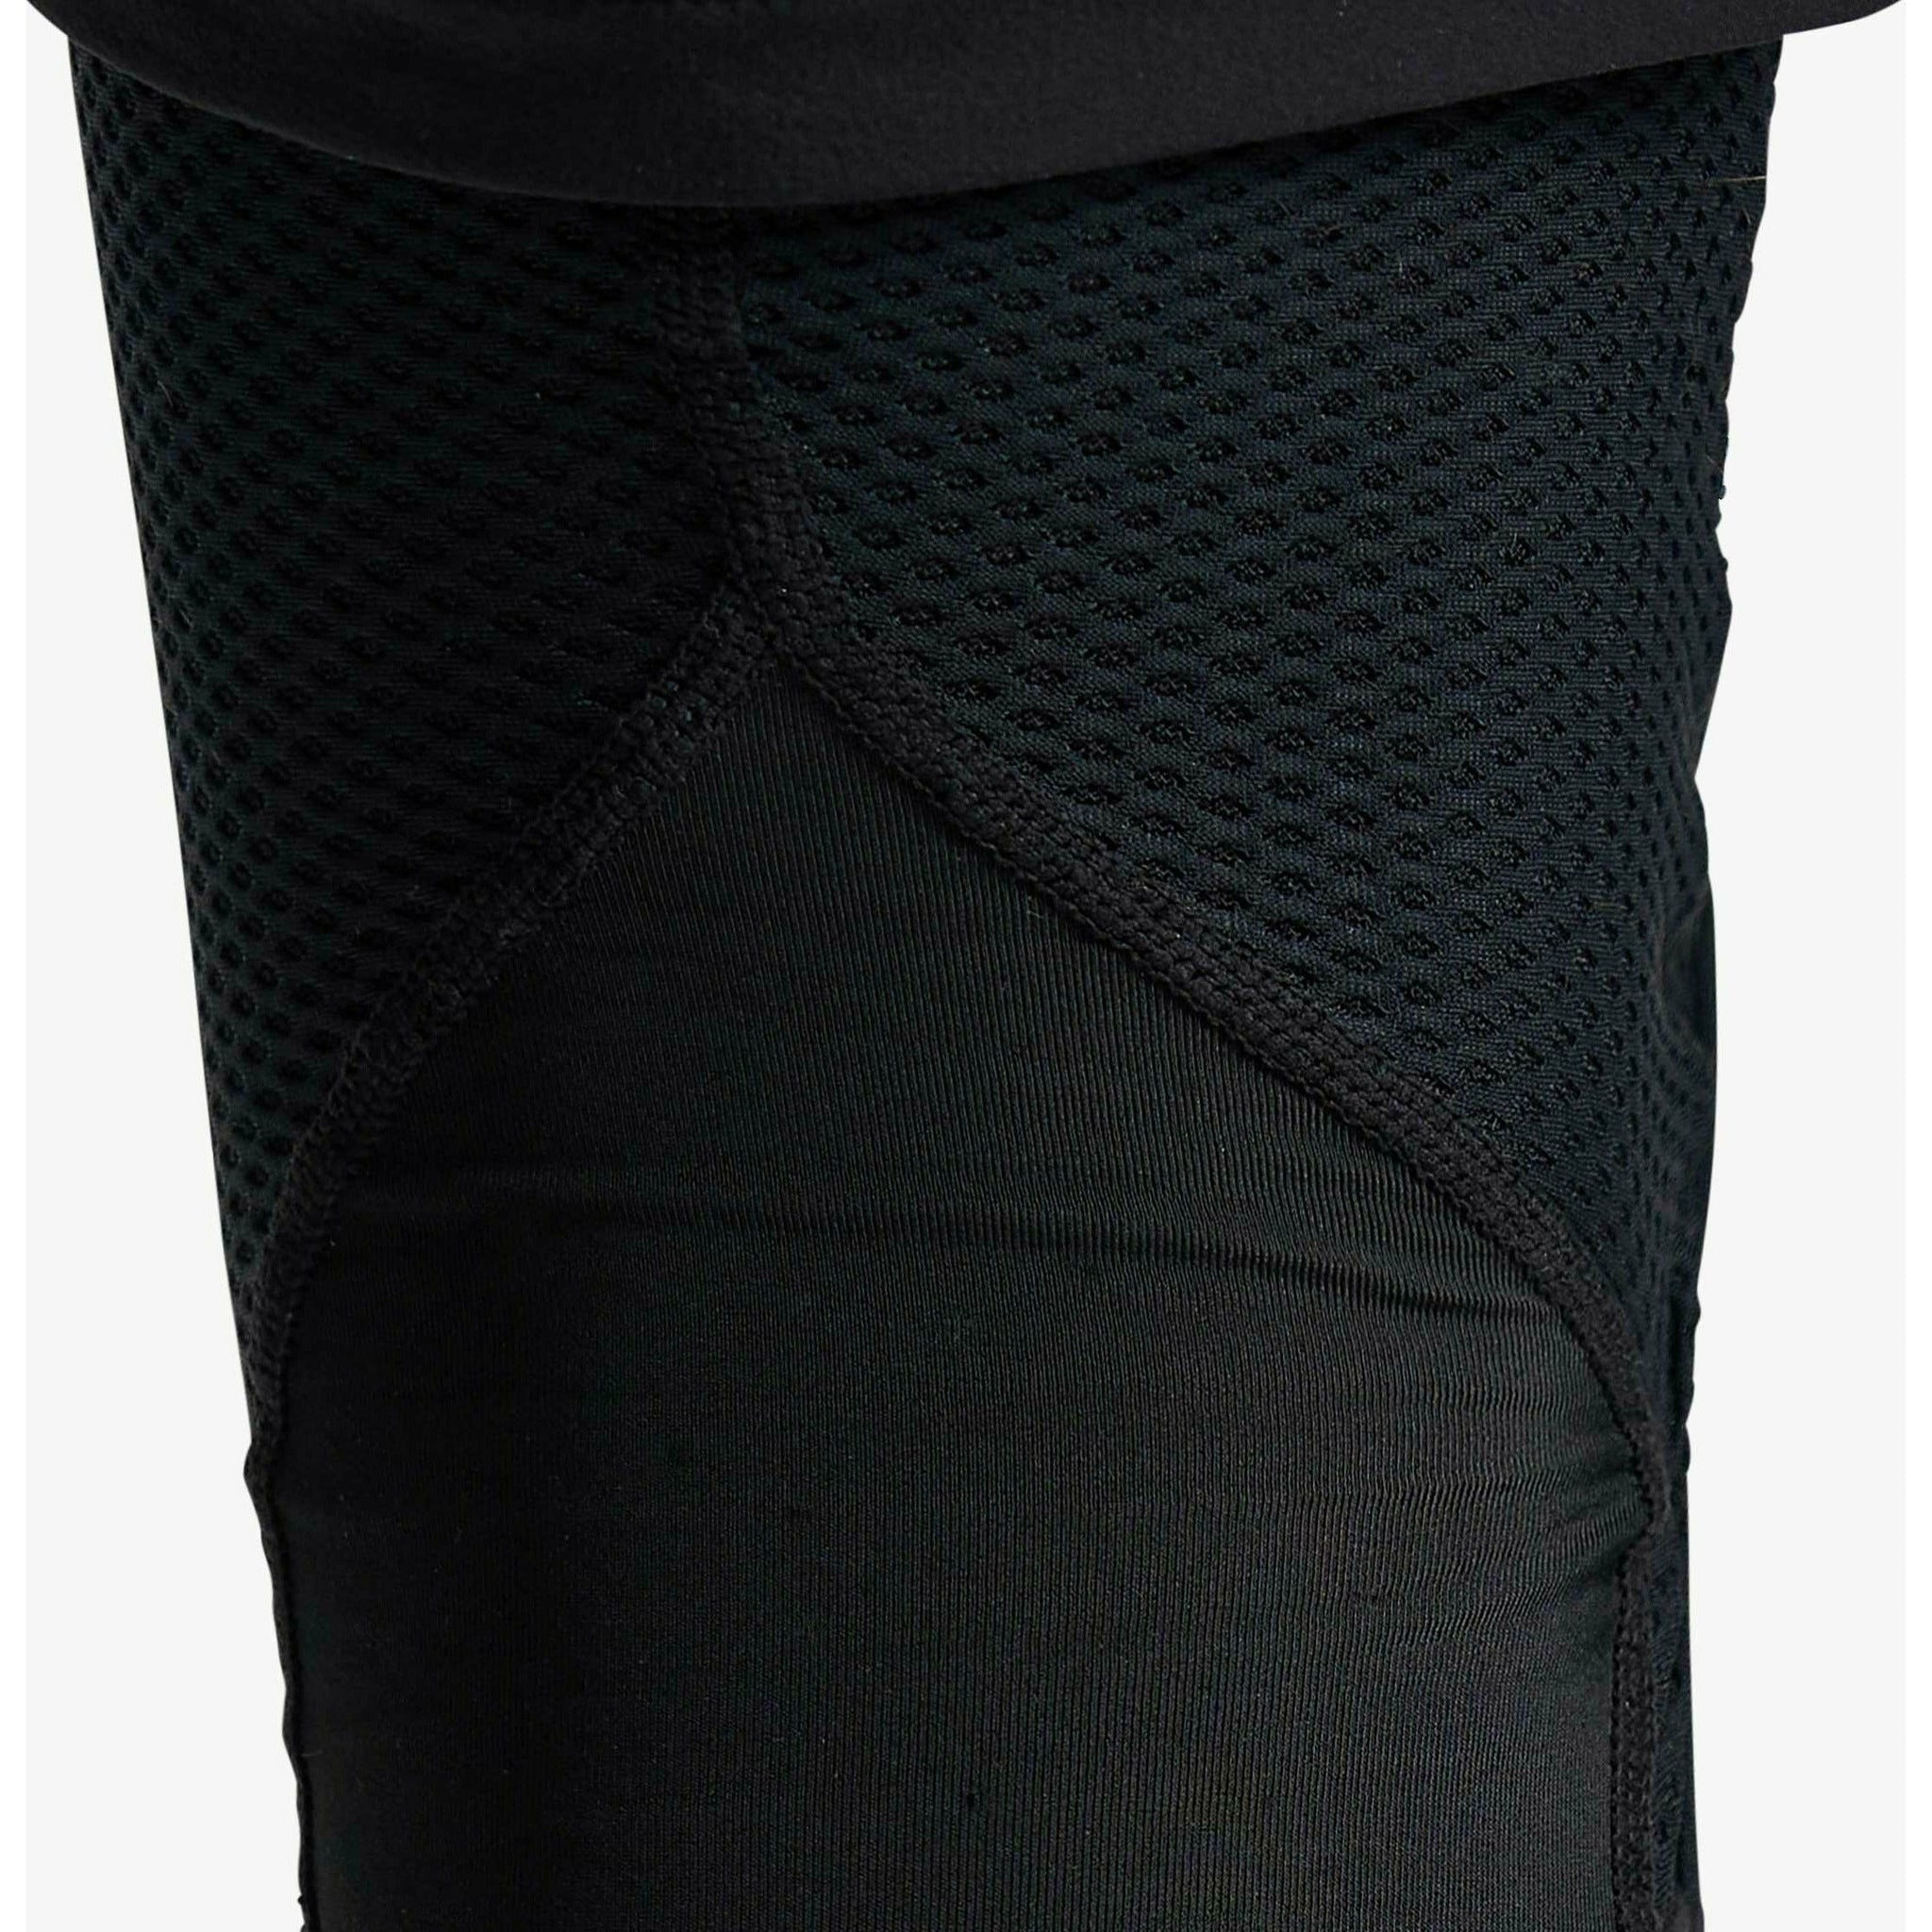 Protection Genoux Covert||Covert Knee Pad